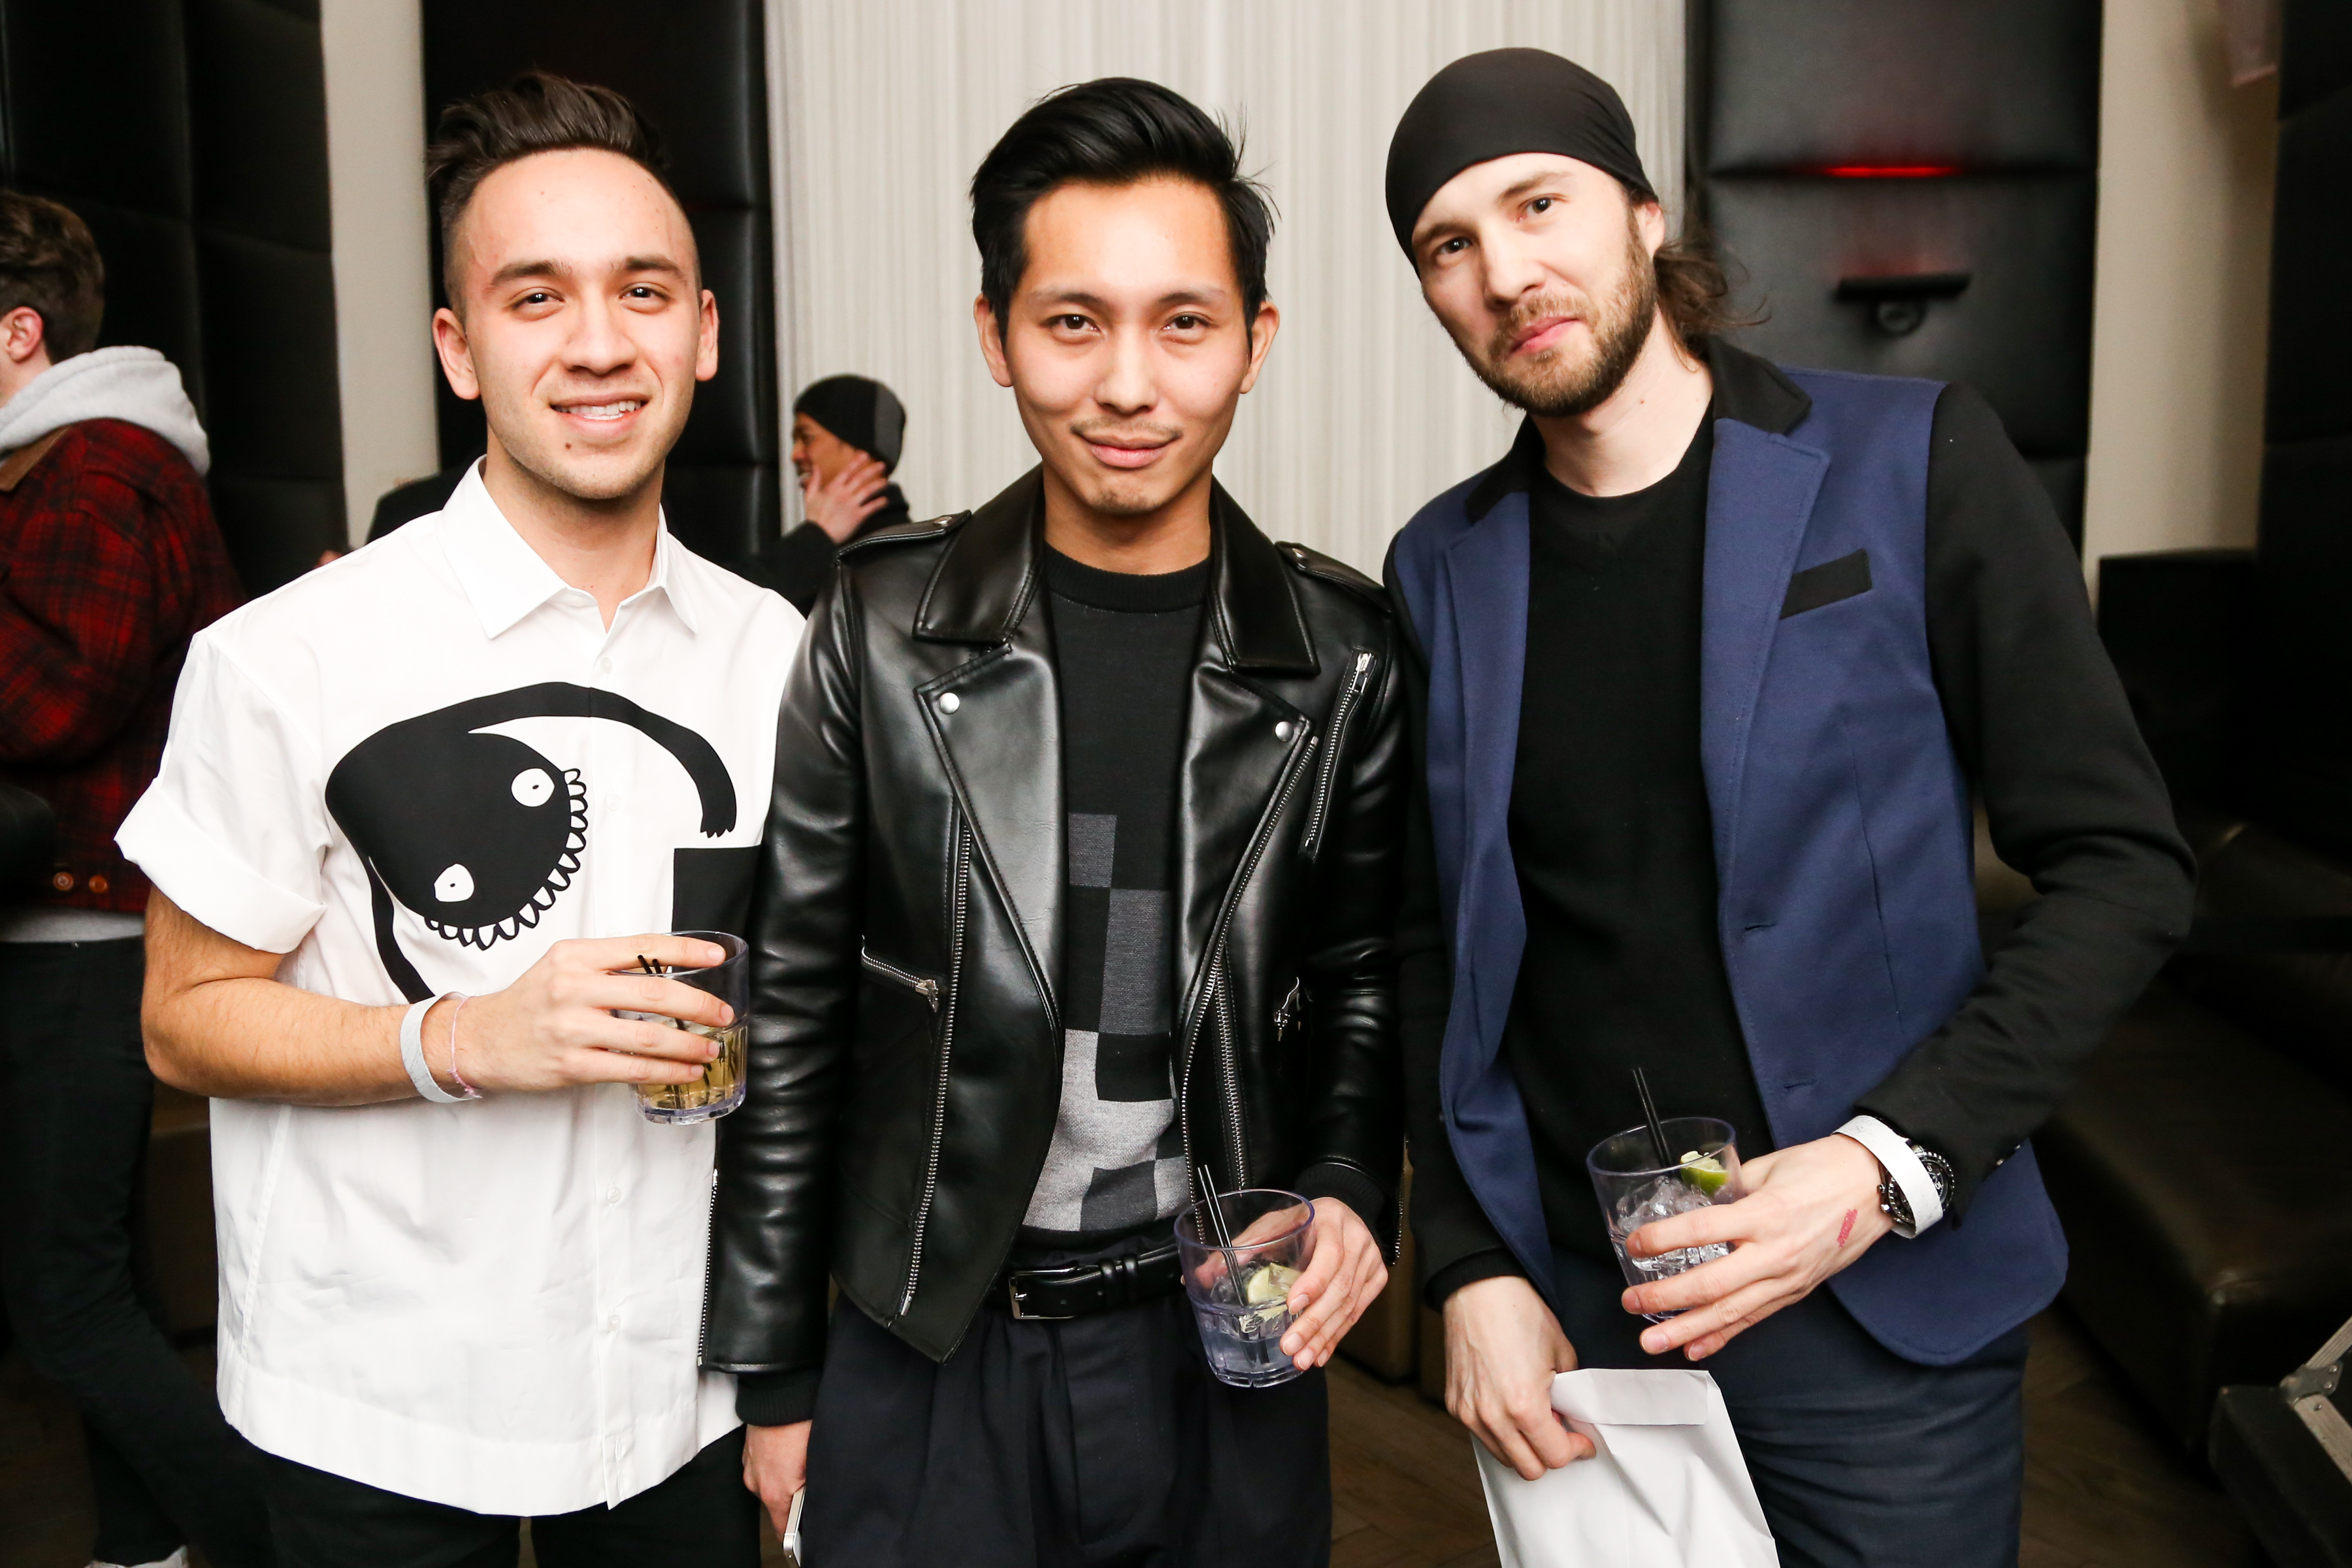 Joshua Glass, Algis Puidokas, Try Lu - ESSENTIAL HOMME's #EHNYFW and Spring Fashion Issue Launch Party